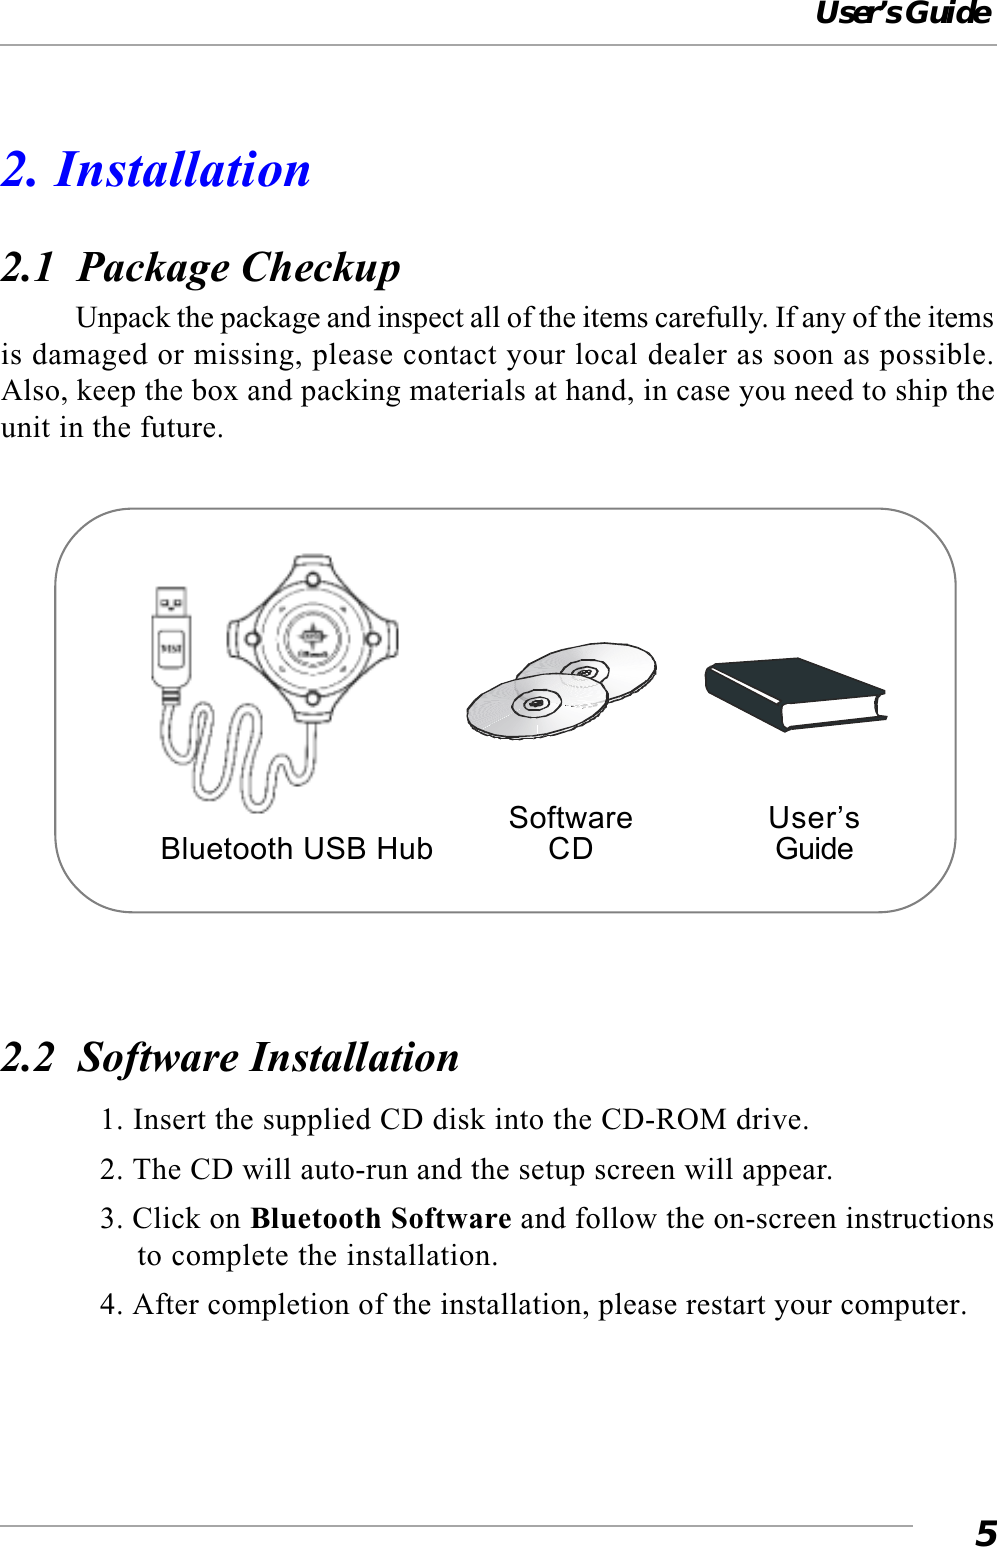 User’s Guide52. Installation2.1  Package CheckupUnpack the package and inspect all of the items carefully. If any of the itemsis damaged or missing, please contact your local dealer as soon as possible.Also, keep the box and packing materials at hand, in case you need to ship theunit in the future.2.2  Software Installation1. Insert the supplied CD disk into the CD-ROM drive.2. The CD will auto-run and the setup screen will appear.3. Click on Bluetooth Software and follow the on-screen instructionsto complete the installation.4. After completion of the installation, please restart your computer.SoftwareCDUser’sGuideBluetooth USB Hub